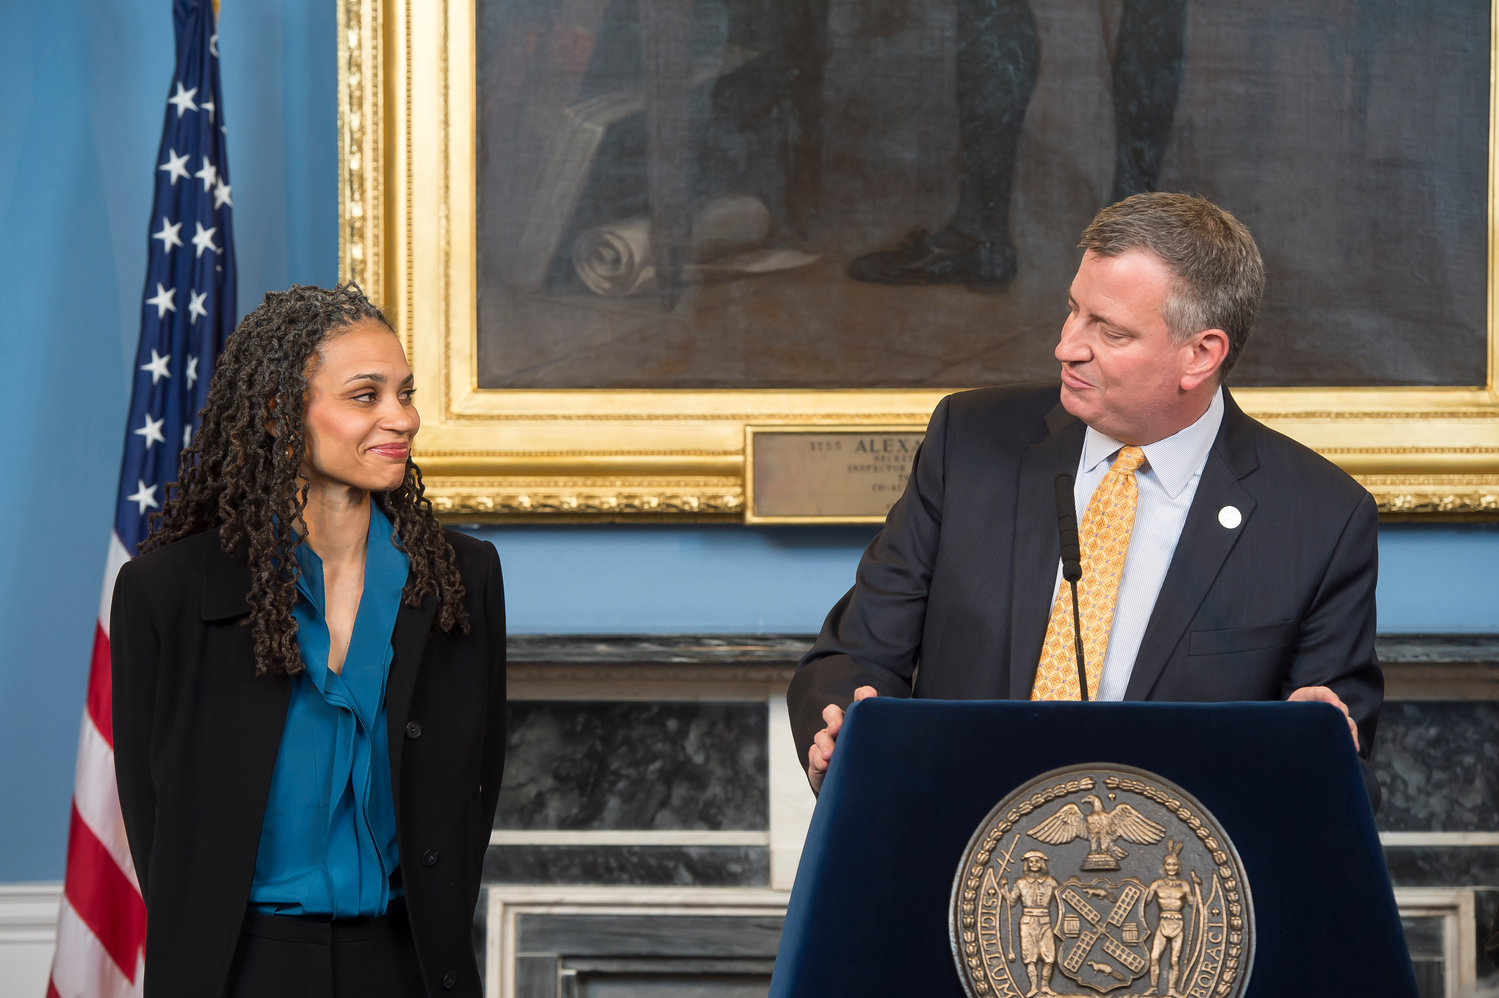 Maya Wiley joined Mayor Bill de Blasio’s administration as an attorney in 2014, working closely with the man she would now like to succeed. She’s running against a crowded field, seeking an office that no woman has yet held — which for Wiley, has been far too long.